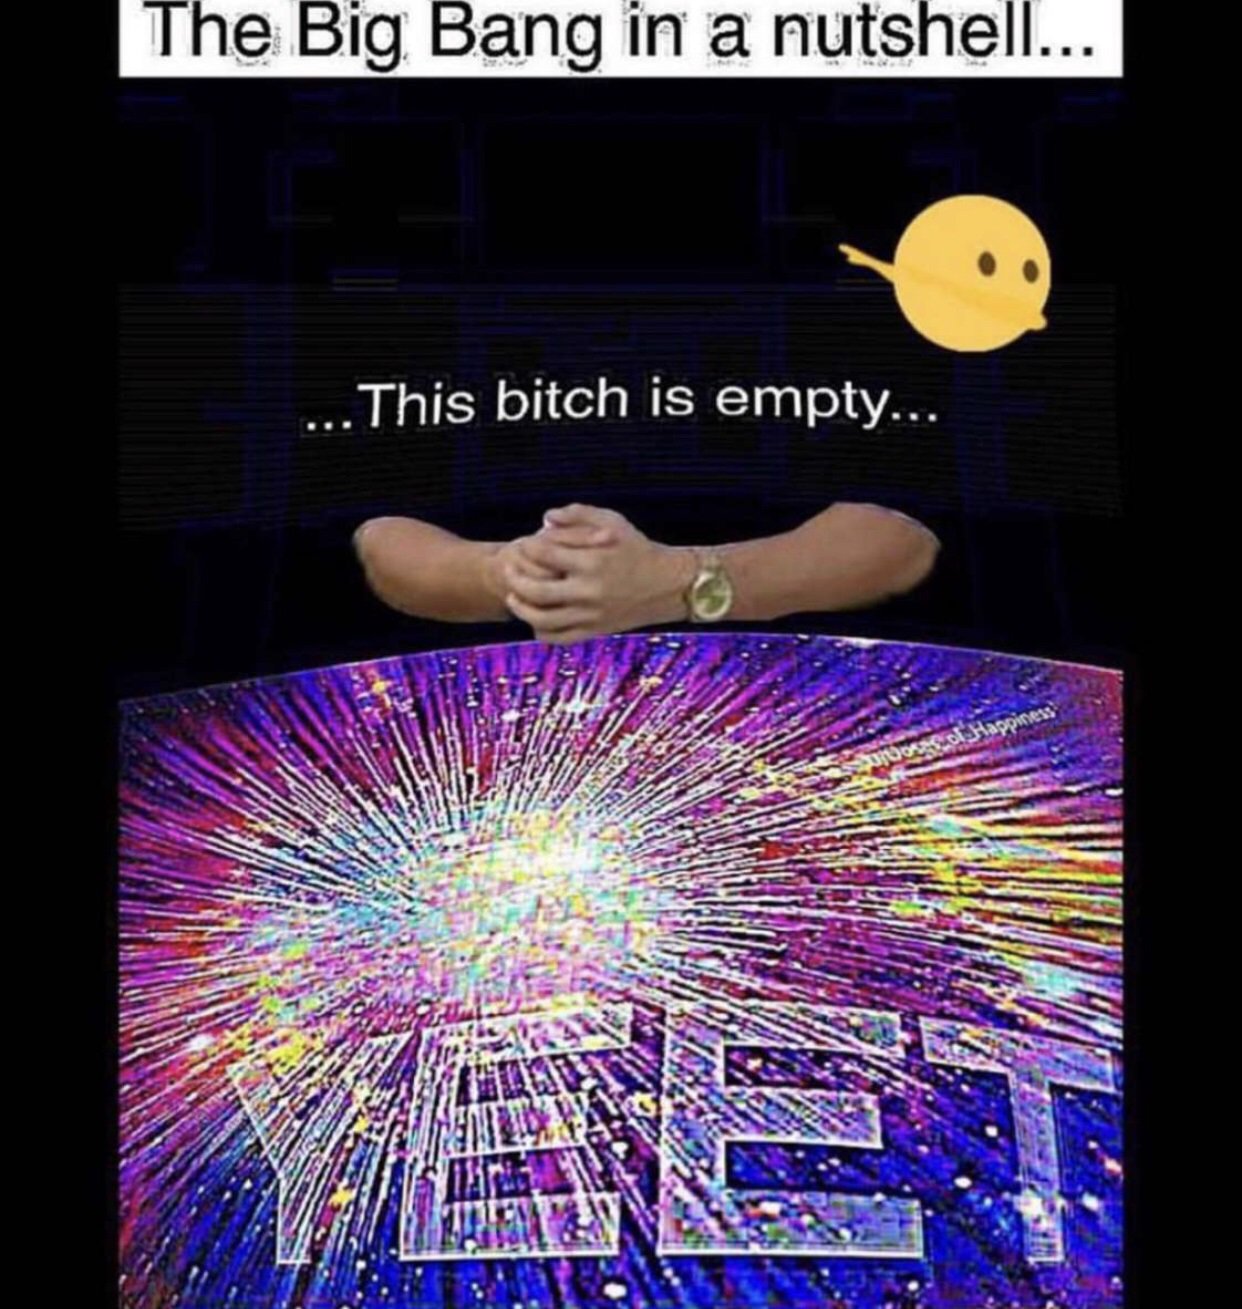 big bang in a nutshell meme - The Big Bang in a nutshell... .... This bitch is empty...